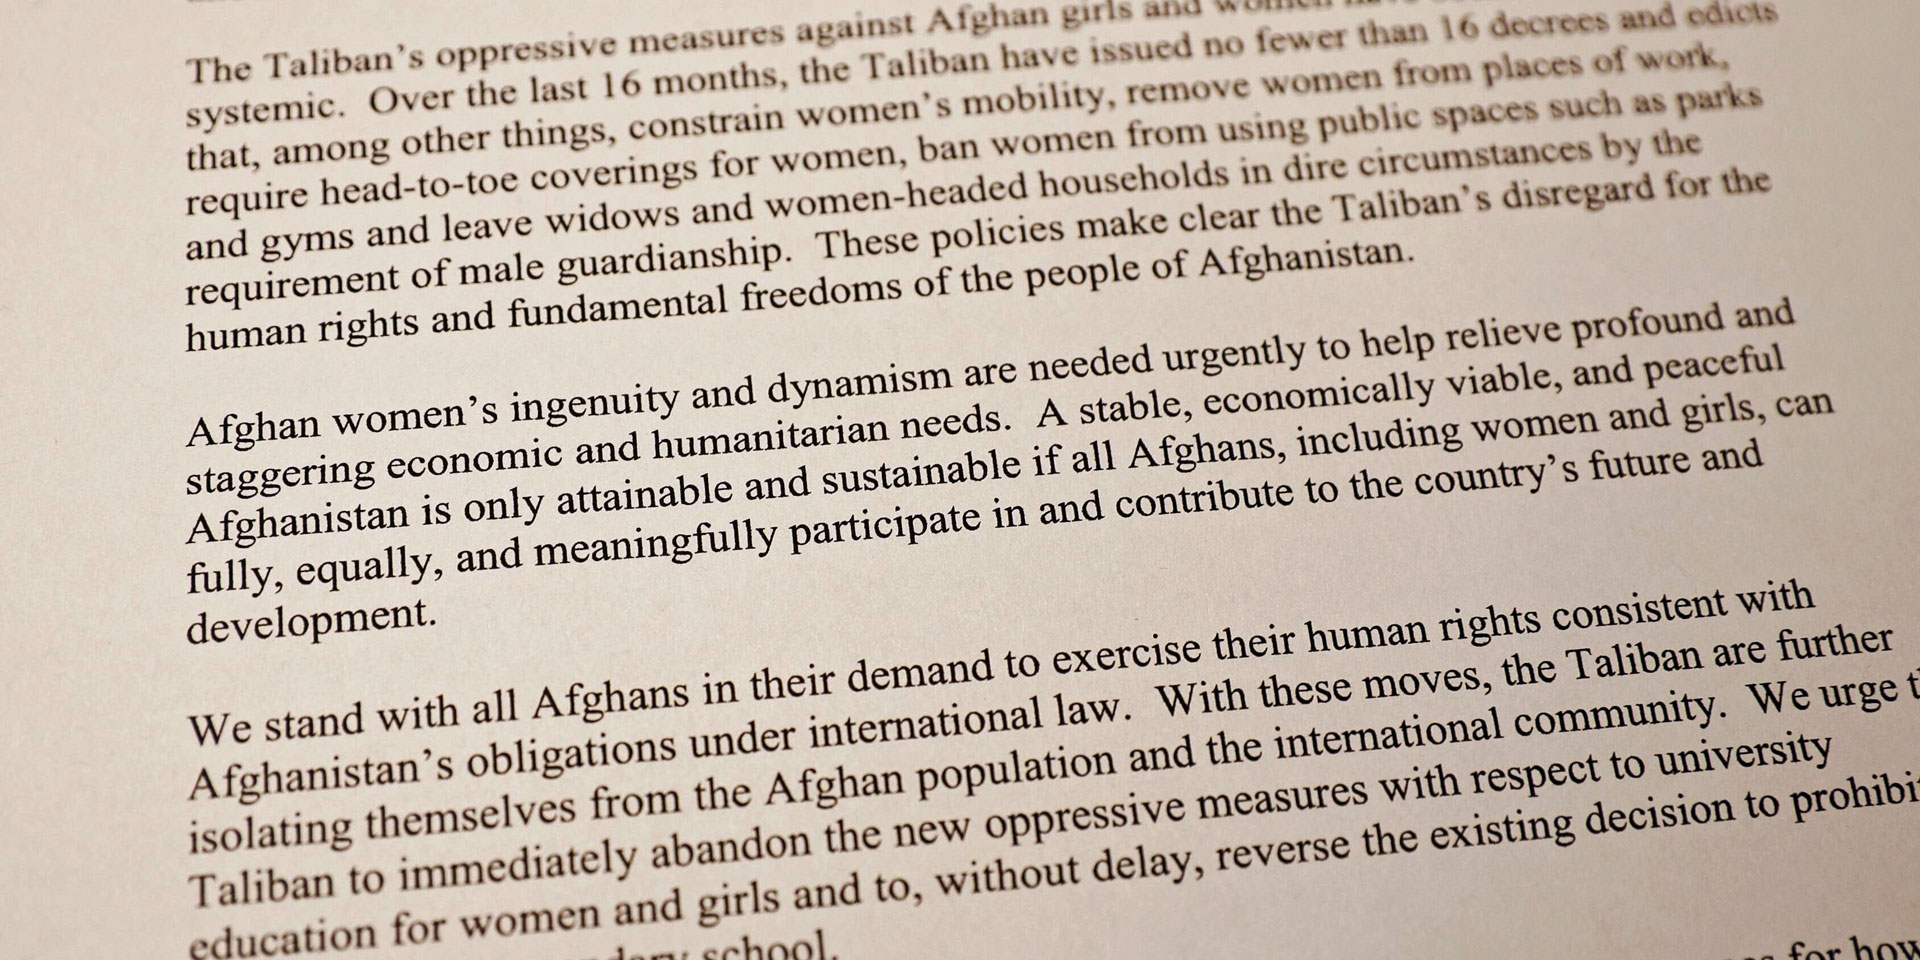 Sentences from the text of the joint declaration.